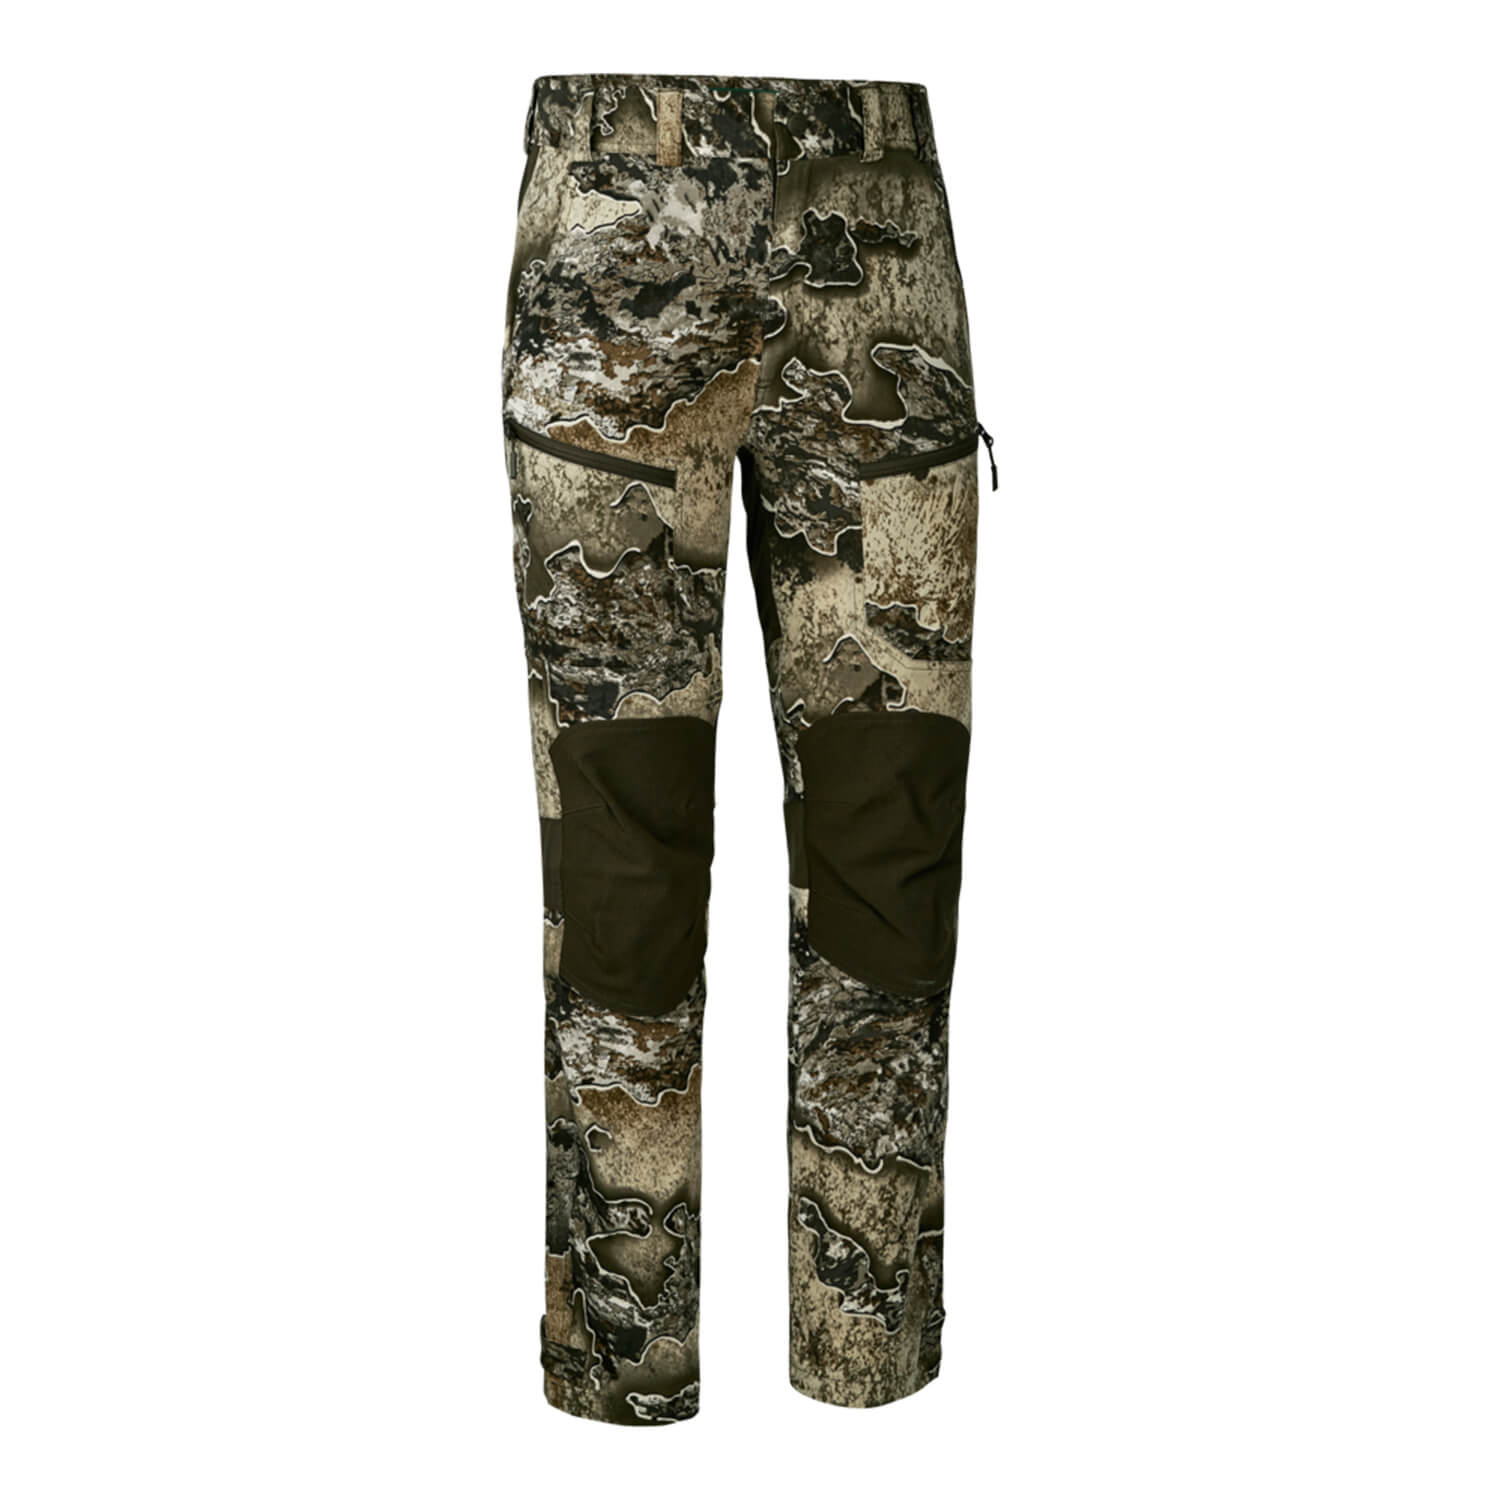 Deerhunter Trousers Excape Light (Realtree Excape) - Sale